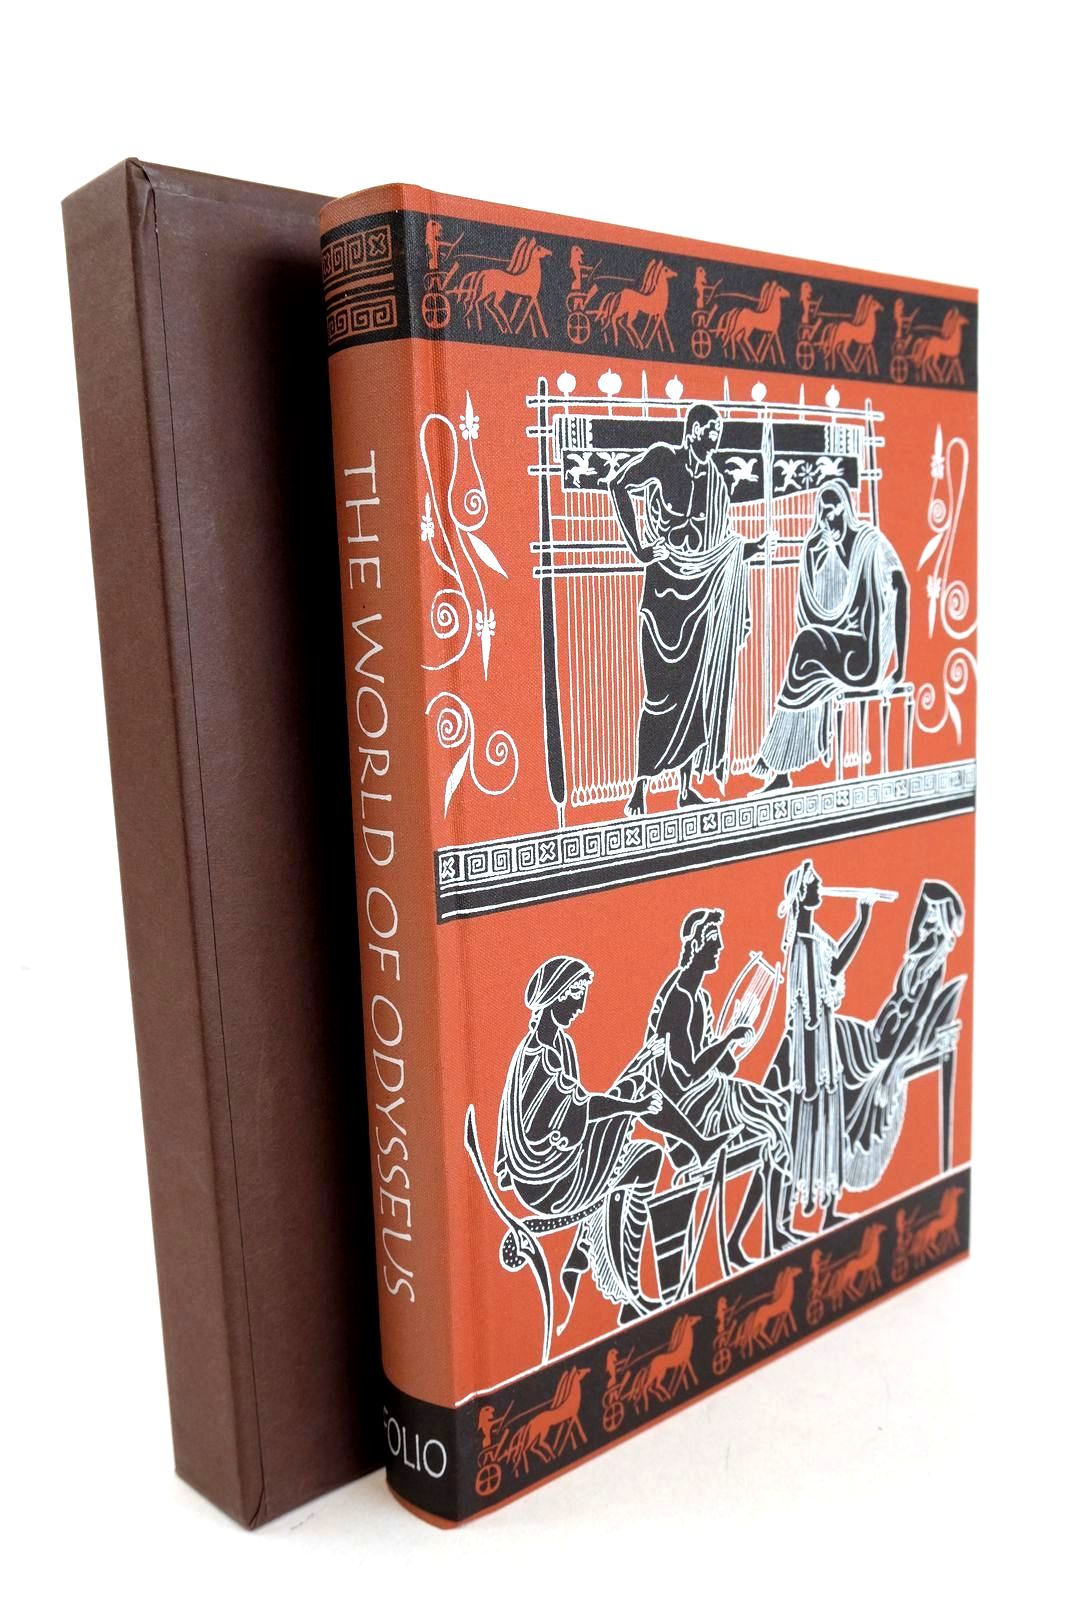 Photo of THE WORLD OF ODYSSEUS written by Finley, M.I. Hornblower, Simon published by Folio Society (STOCK CODE: 1326775)  for sale by Stella & Rose's Books